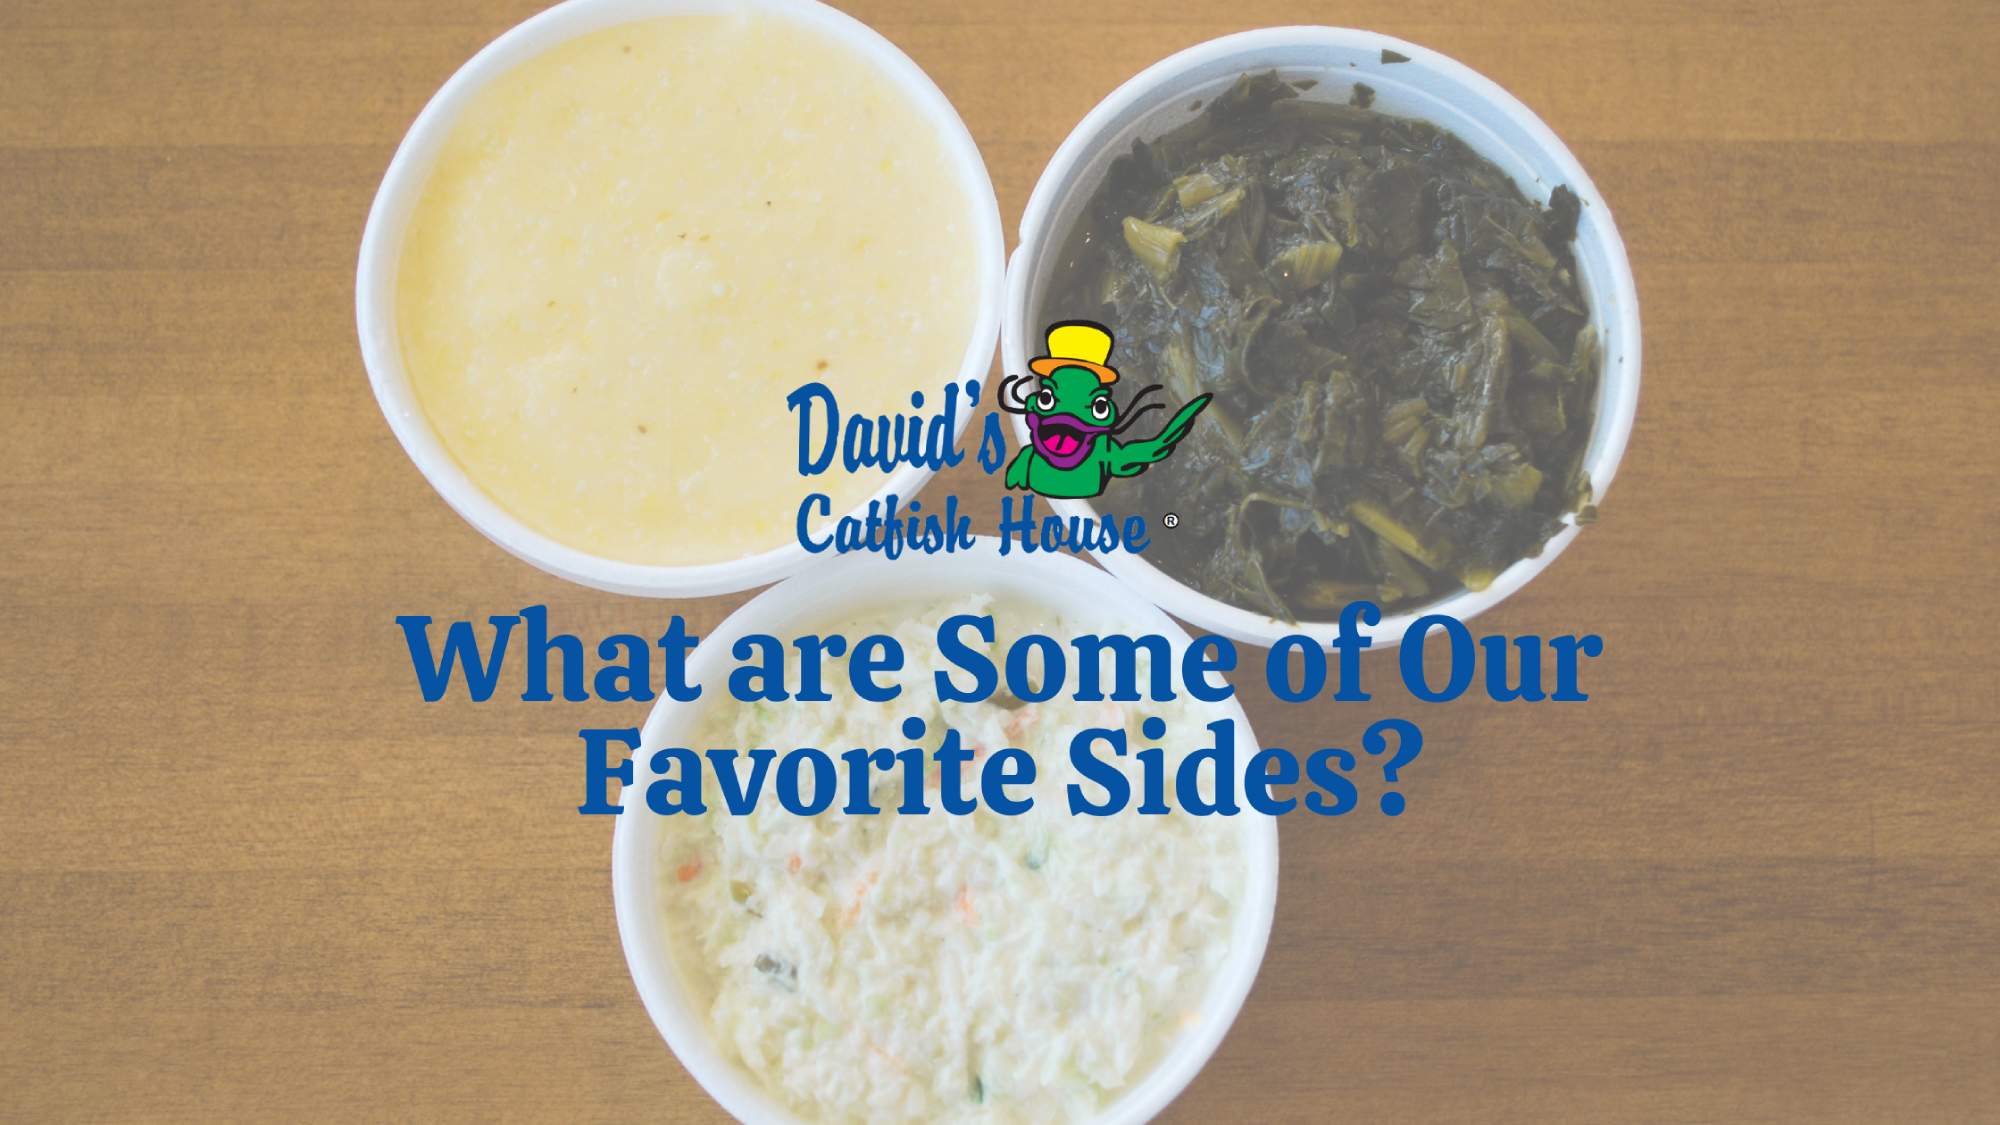 What are Some of Our Favorite Sides?